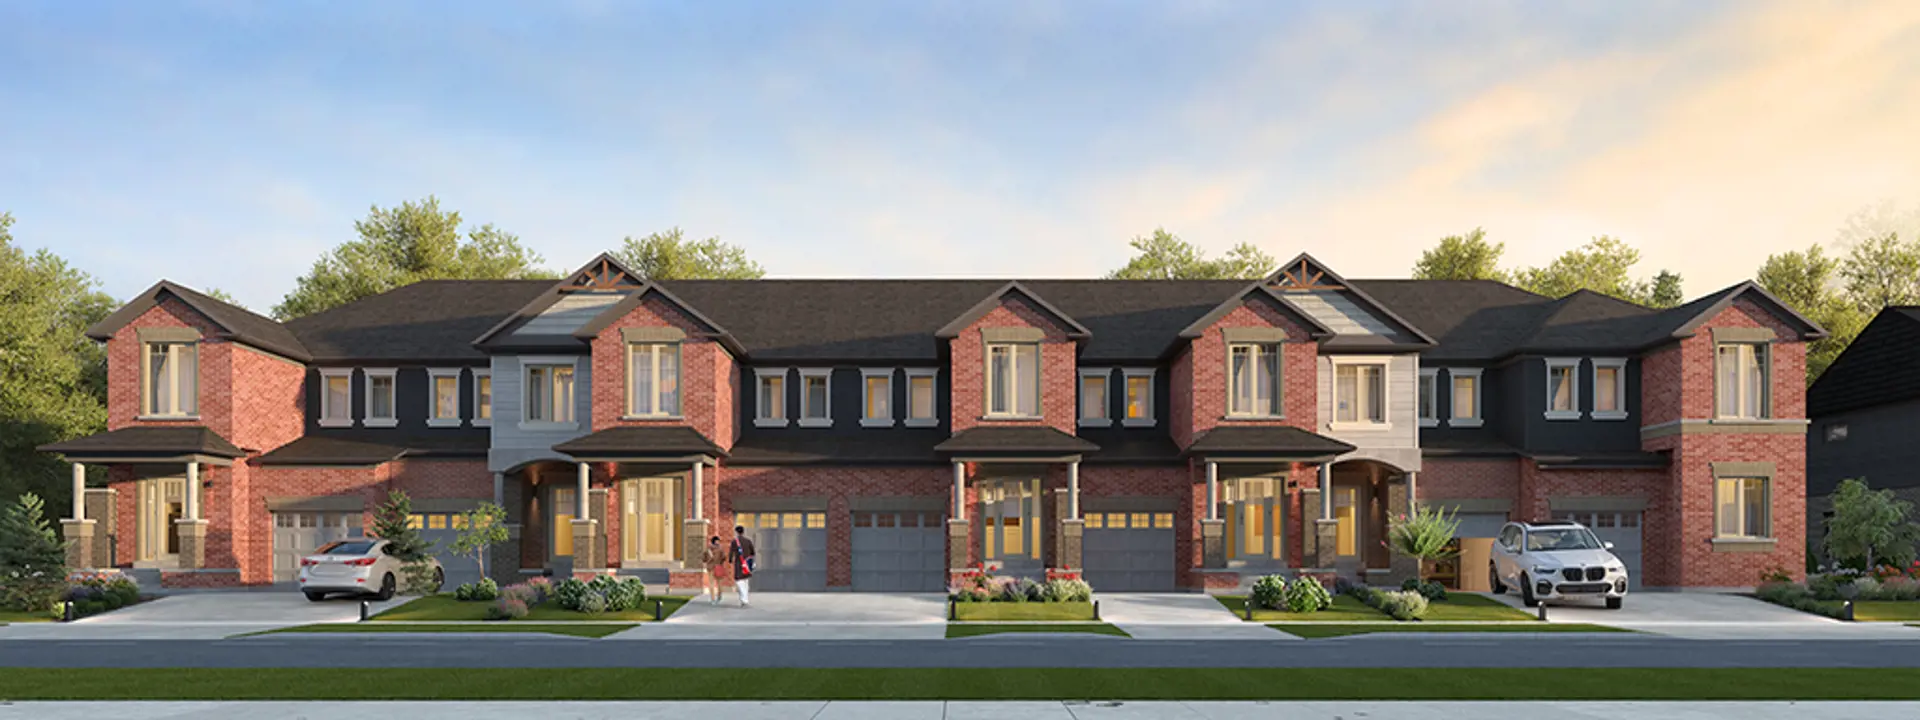 Hewitt's Gate located at Hewitt's Gate Community  | Hay Lane,  Barrie,   ON image